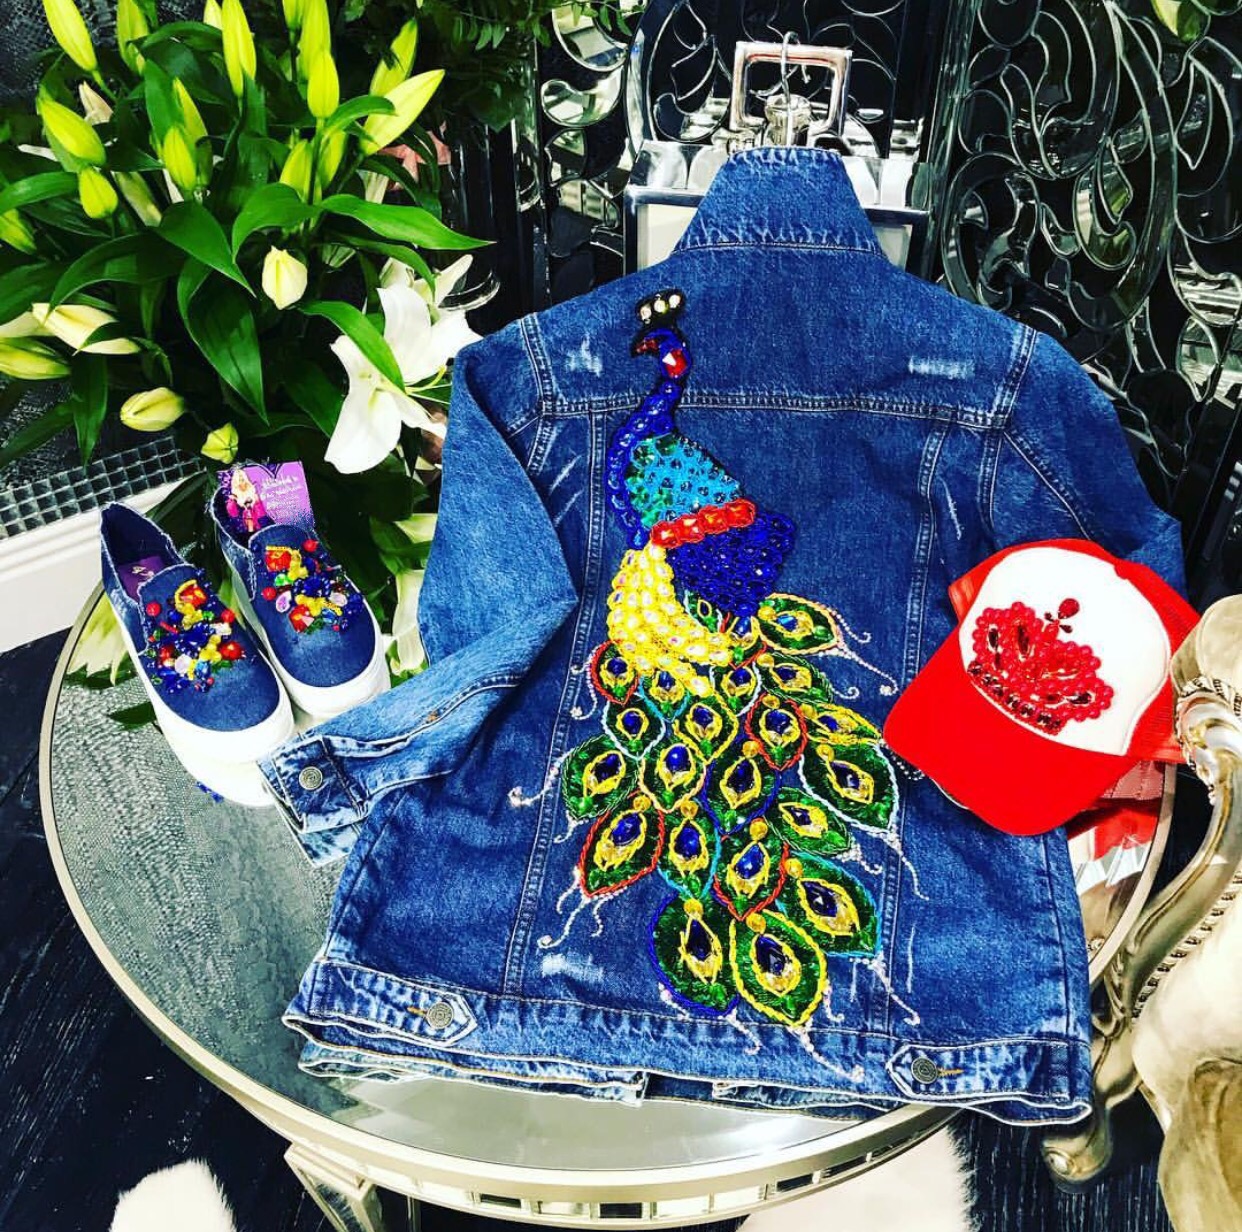 Embroidered embellished peacock denim jacket and accessories